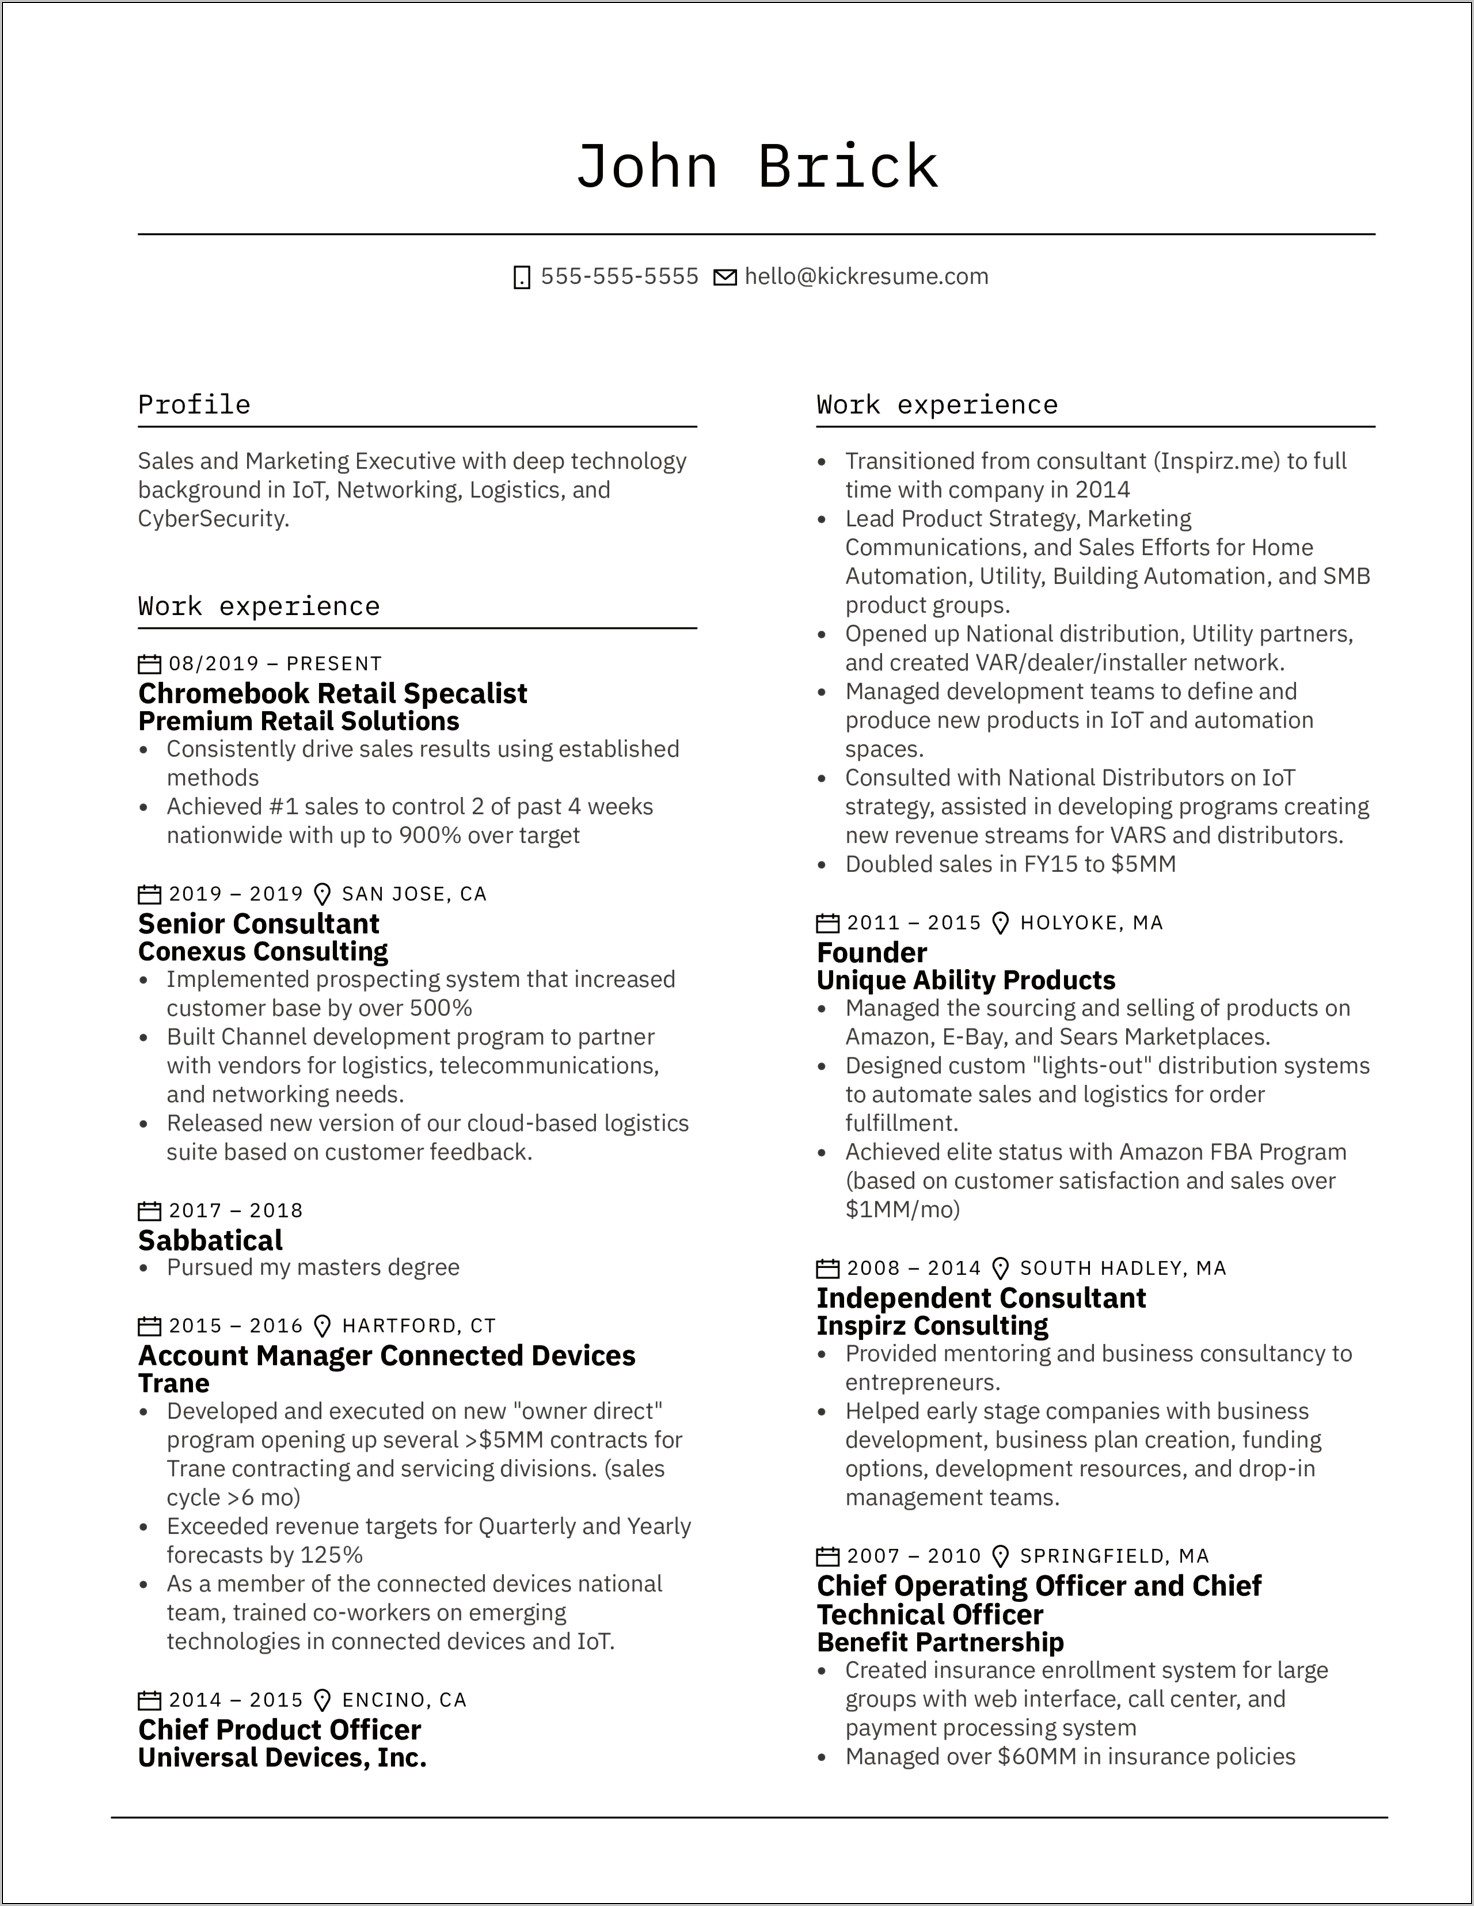 Sample Resume For Technical Director